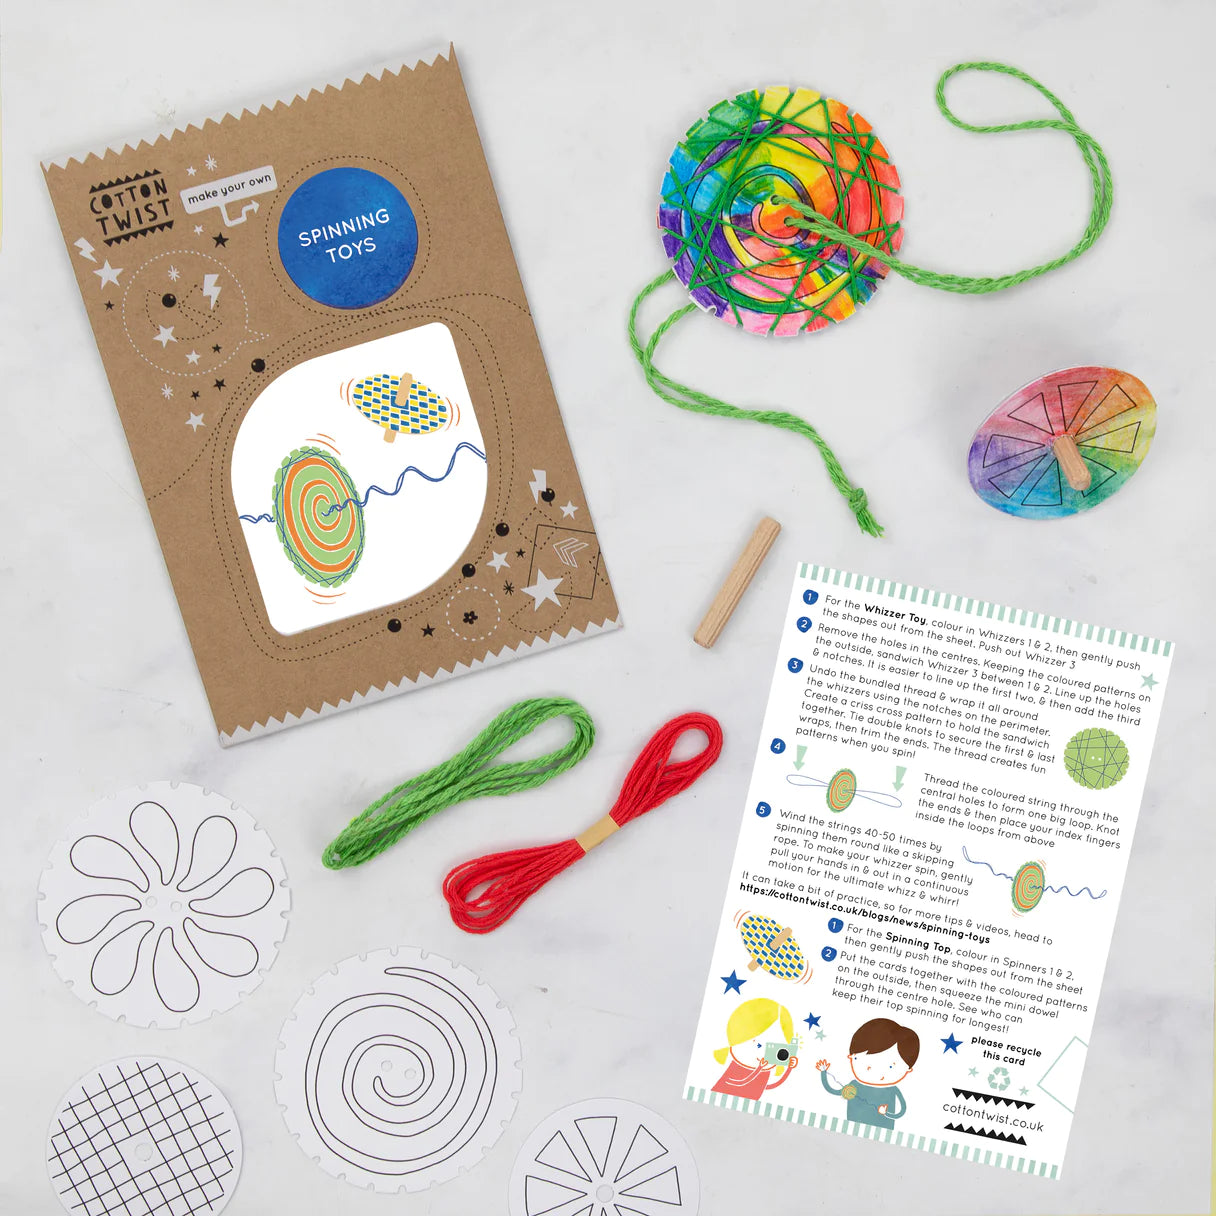 Cotton Twist Make Your Own - Spinning Toys Kit - Little Reef and Friends